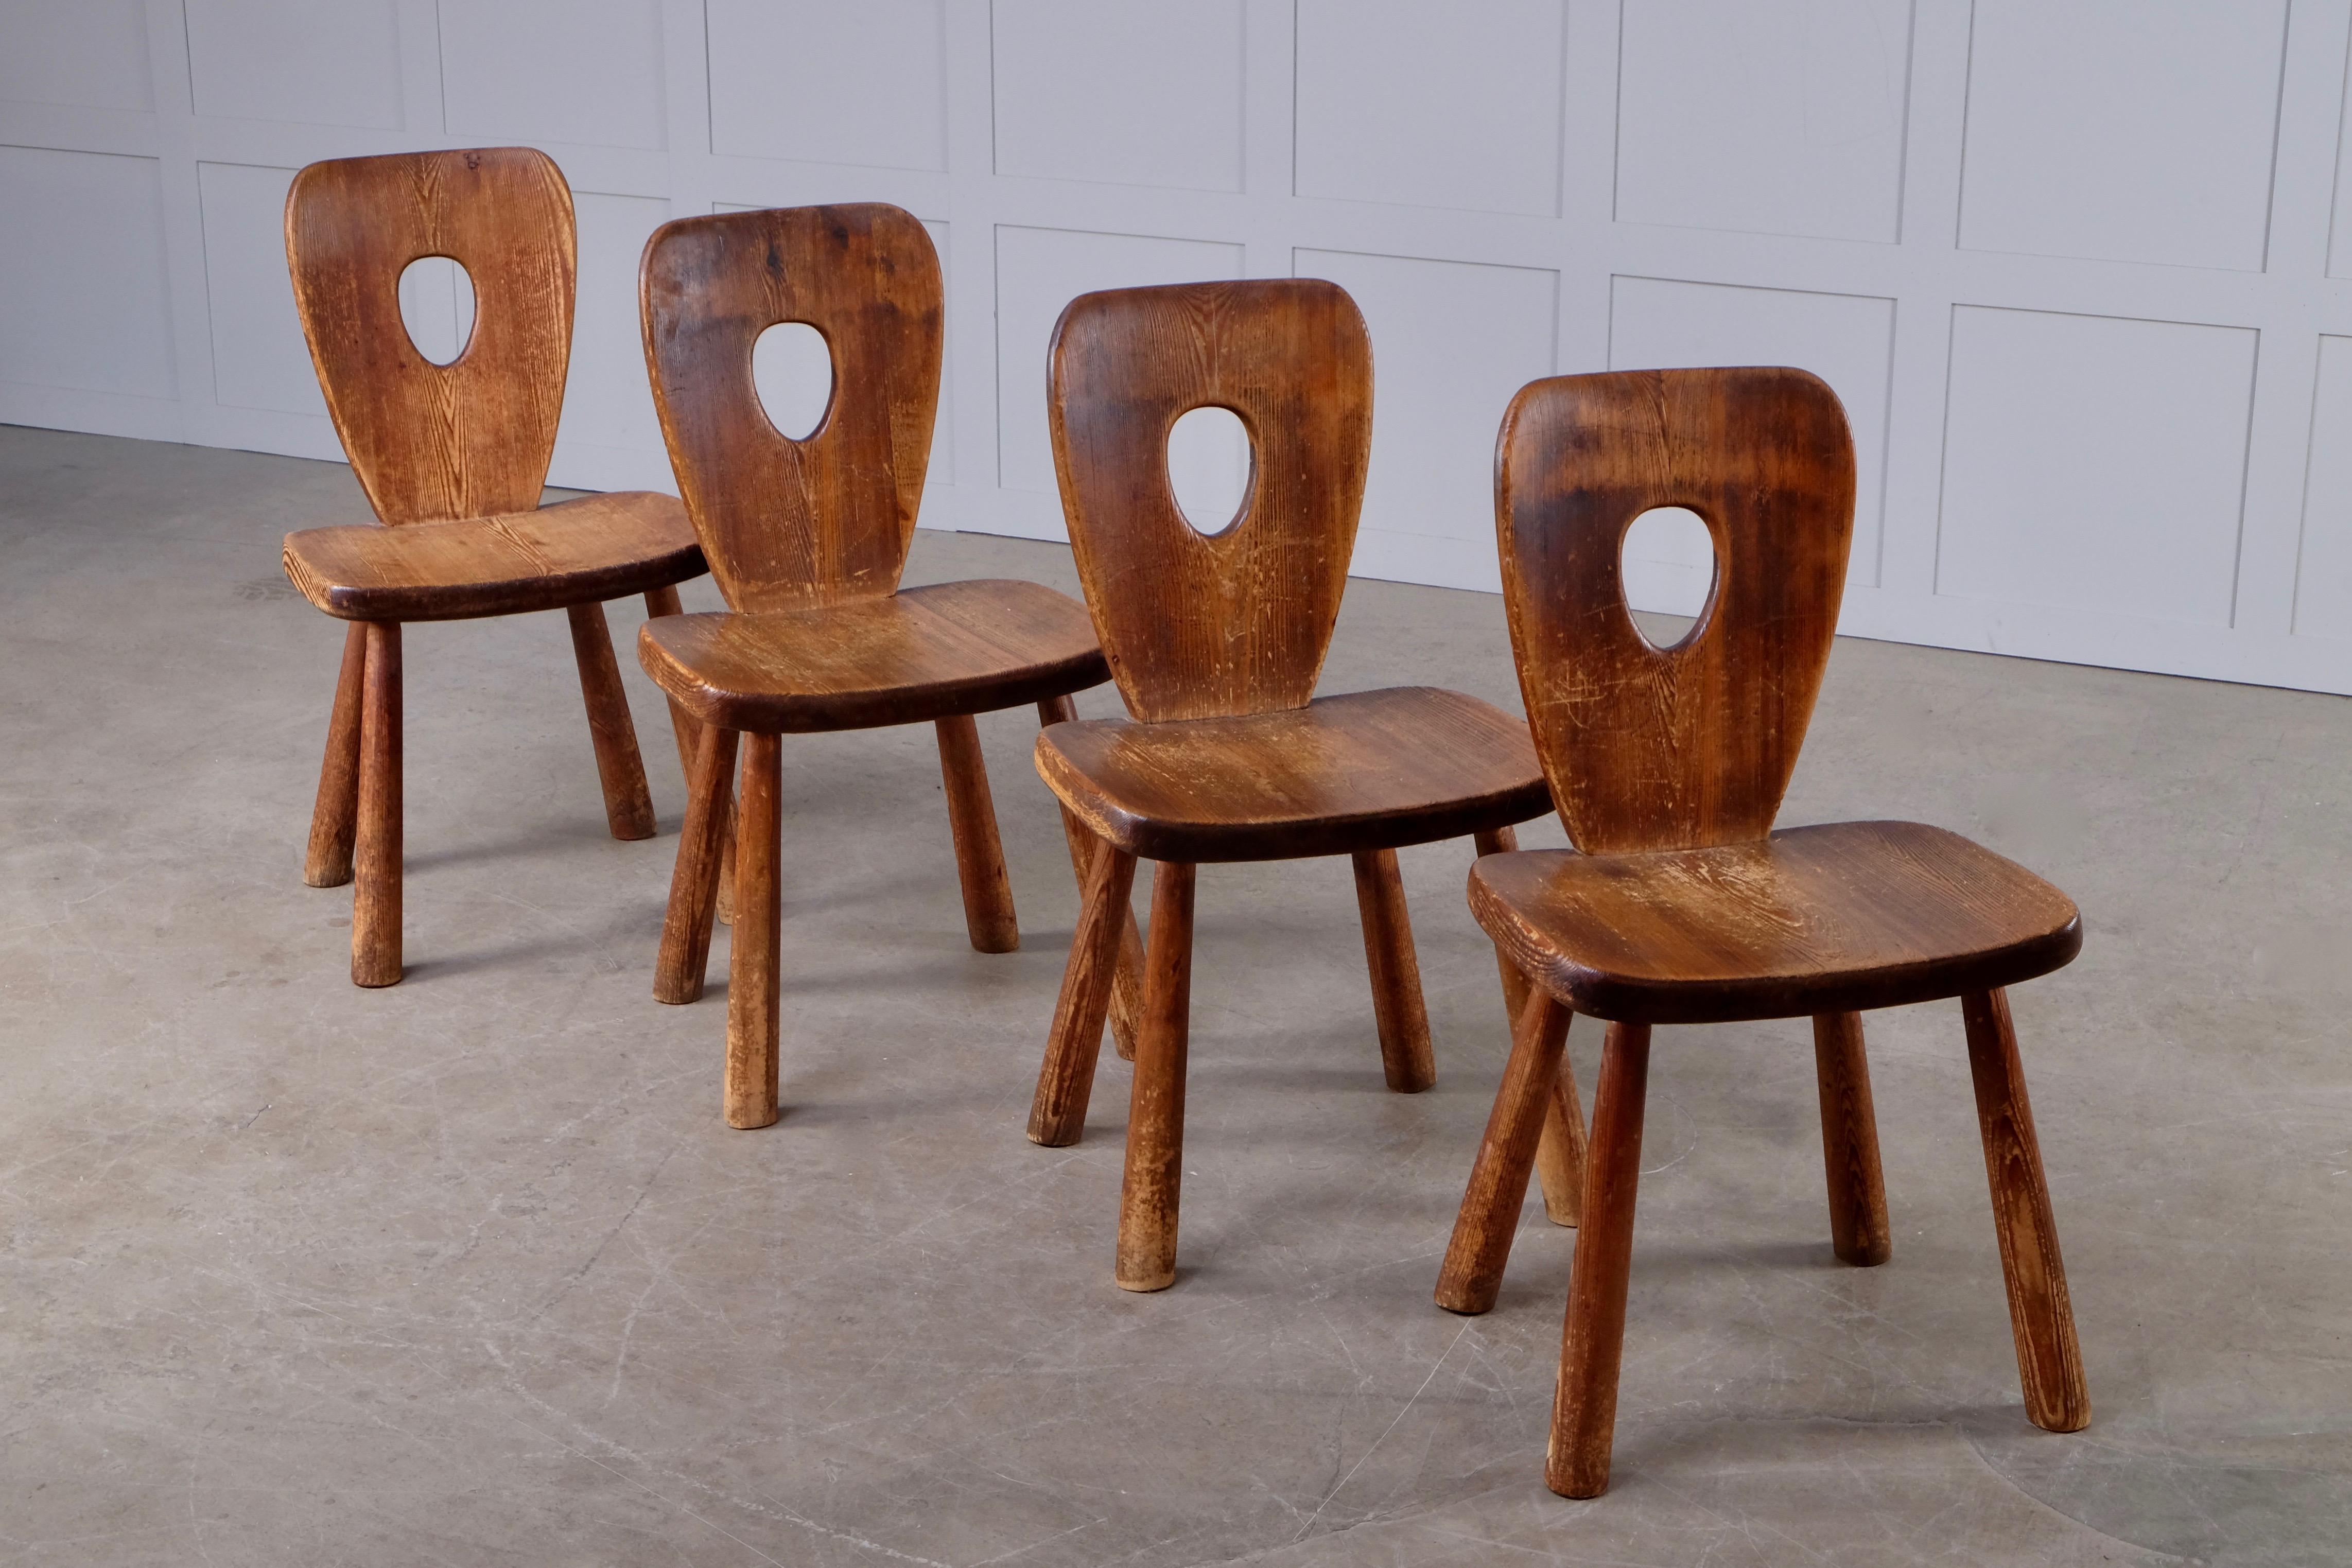 Dining chairs by Bo Fjaestad, Sweden, 1930s.
Original condition.
  